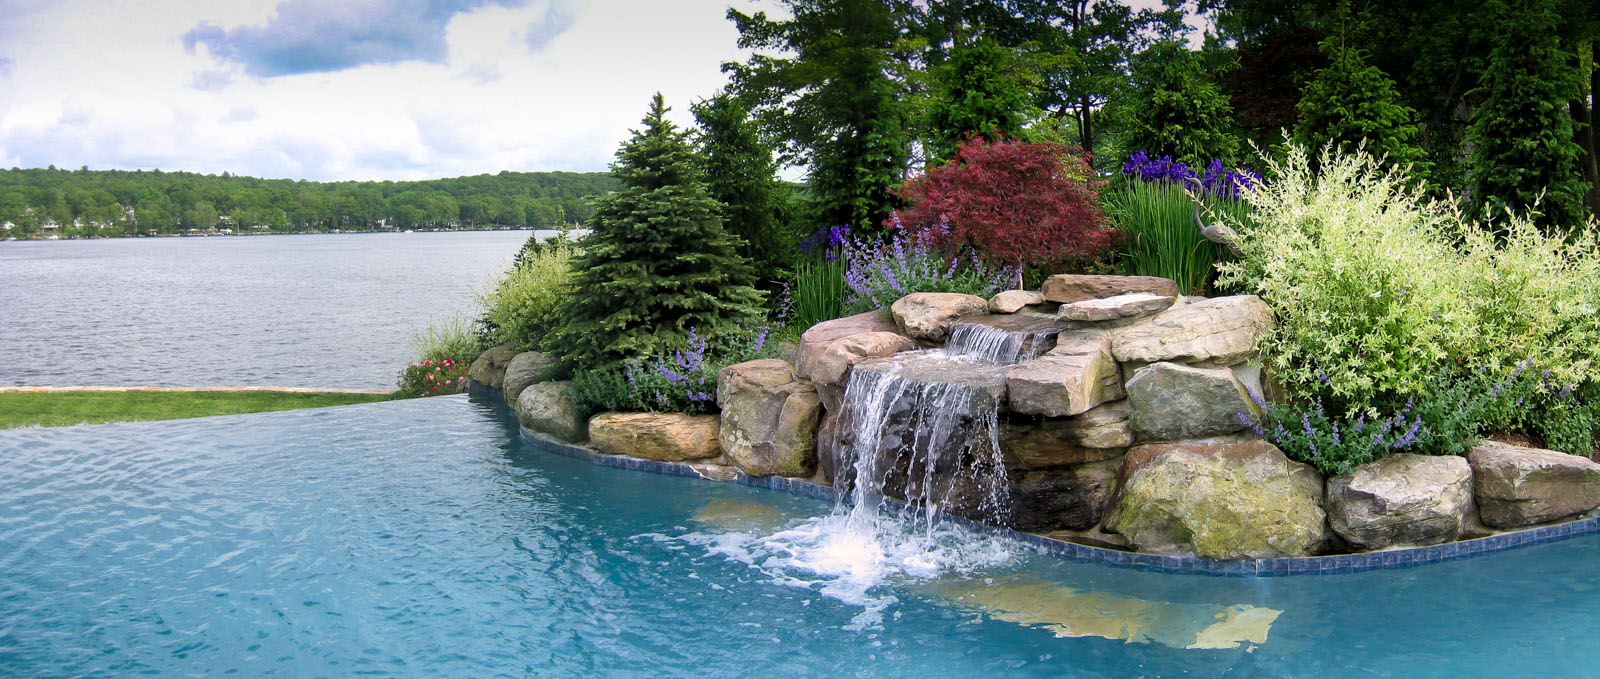 photo of pool waterfall with pool landscaping - nj